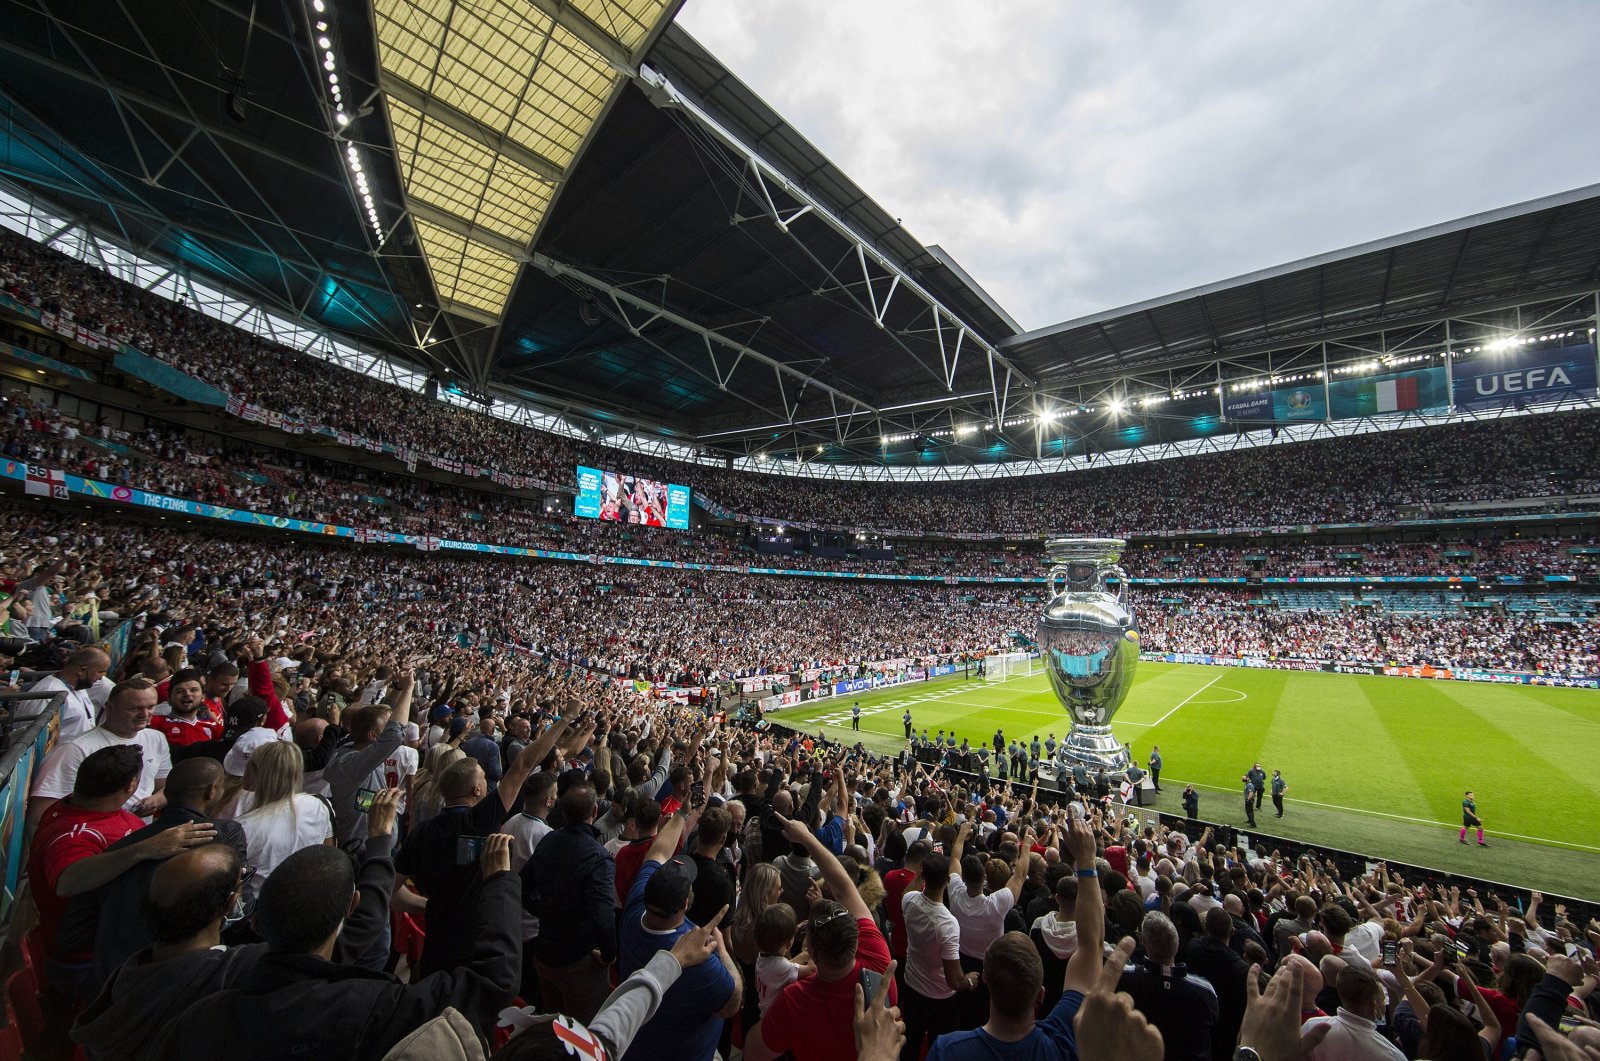 A large inflatable version of the trophy is seen on the pitch before the UEFA Euro 2020 final between Italy and England at Wembley Stadium in London, United Kingdom, July 11, 2021. (Getty Images)